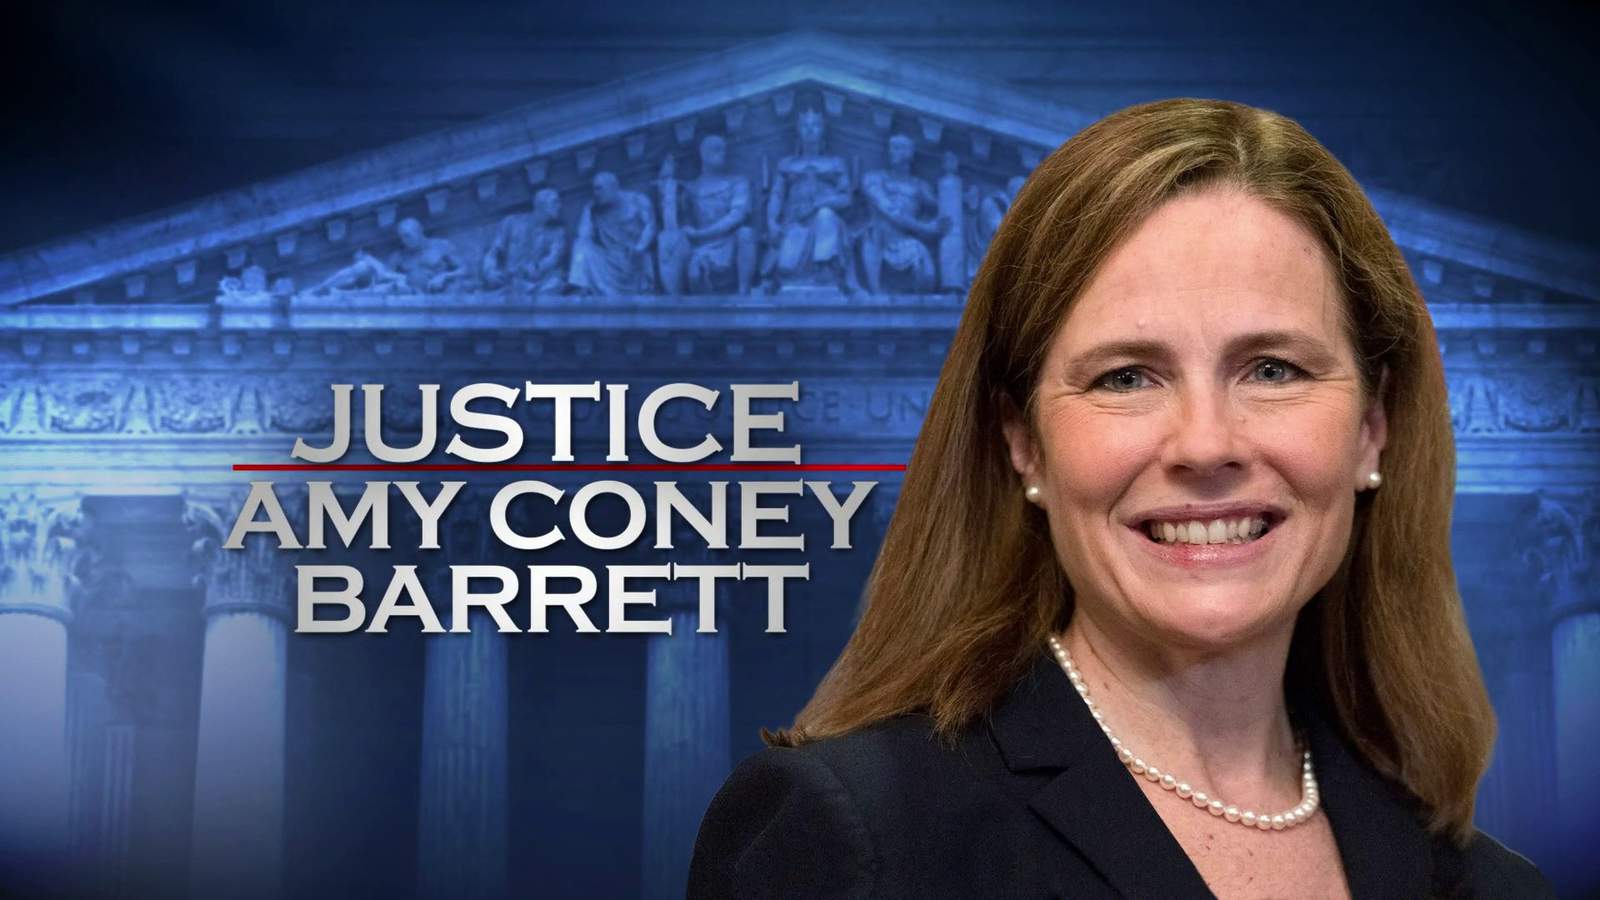 Virginia lawmakers react to Amy Coney Barrett’s confirmation to Supreme Court